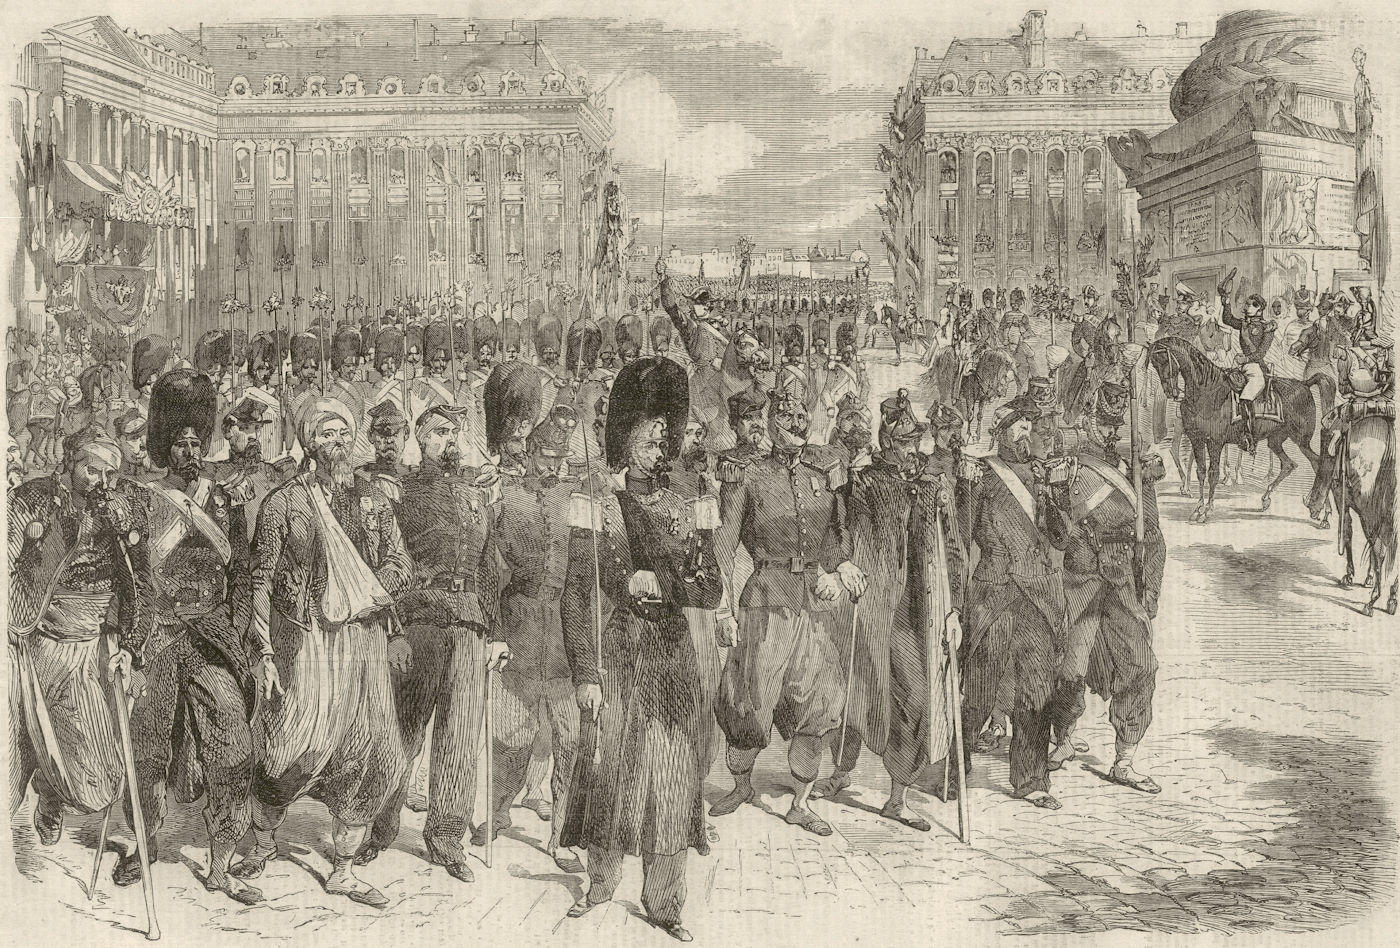 Associate Product The Crimean troops at the foot of the column, Place Vendome. Paris 1856